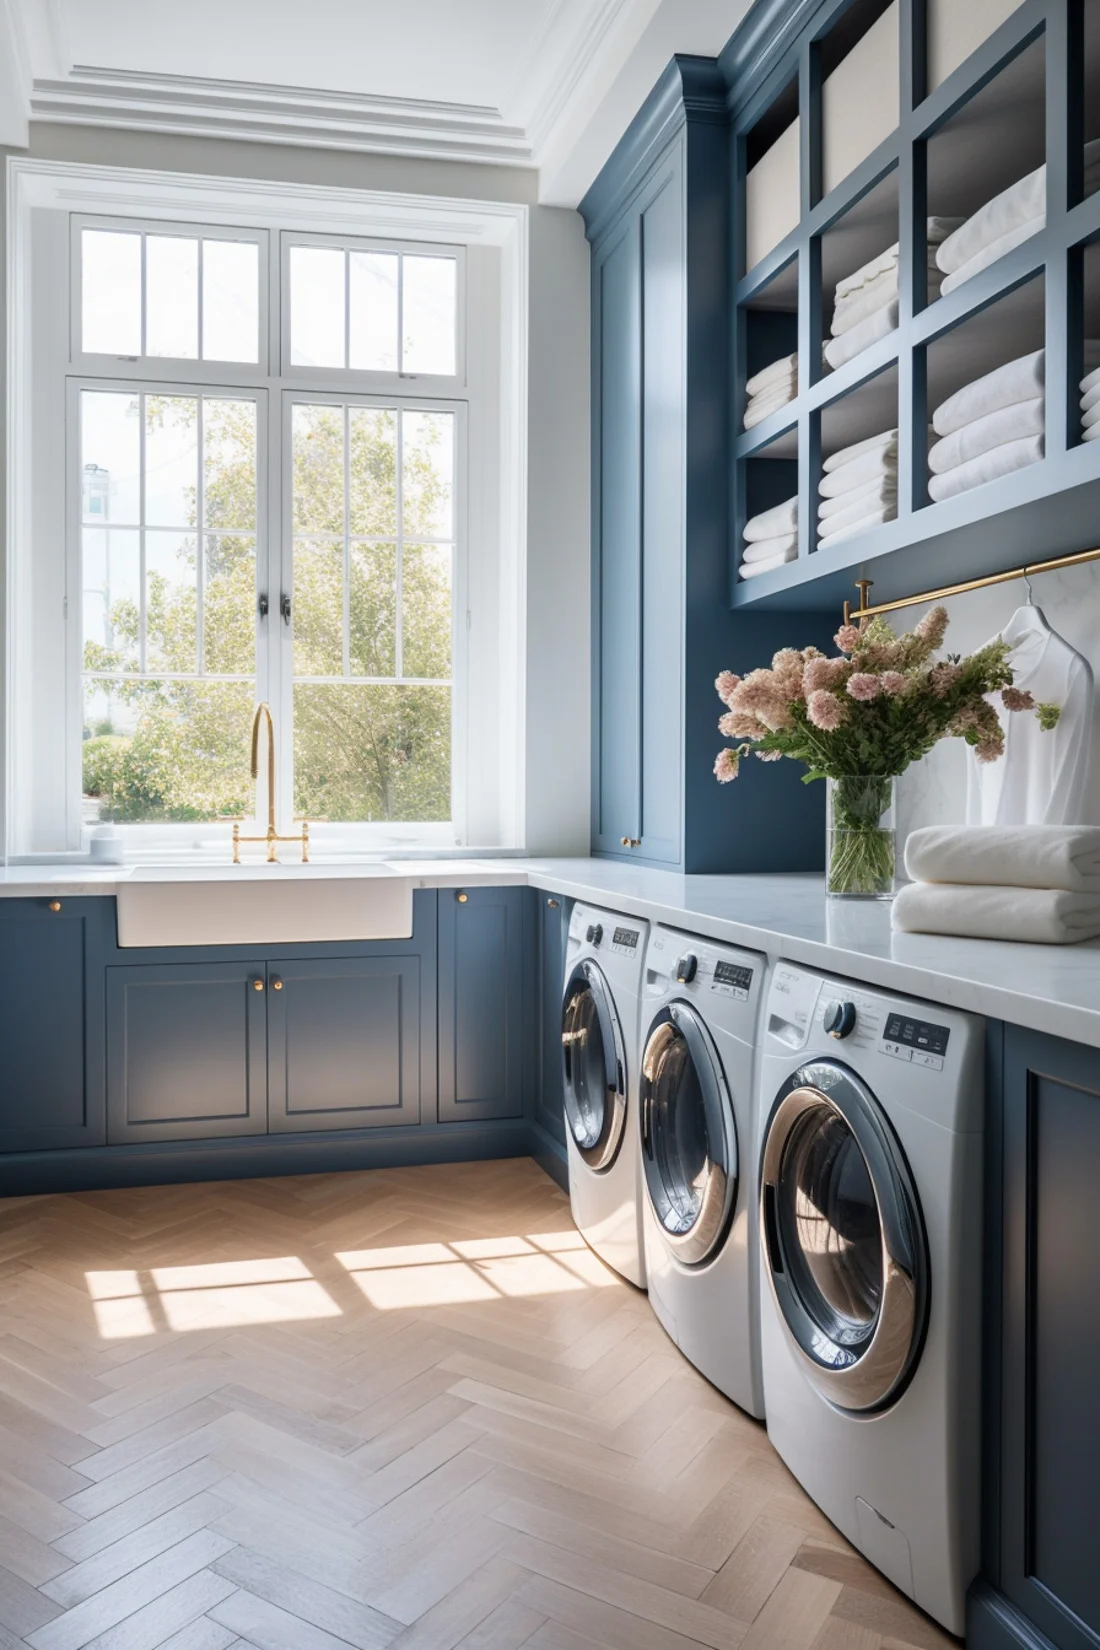 blue and white laundry room with open shelving above washer dryer with hanging rod made of metal, towels and bronze accents, farmhouse sink and window